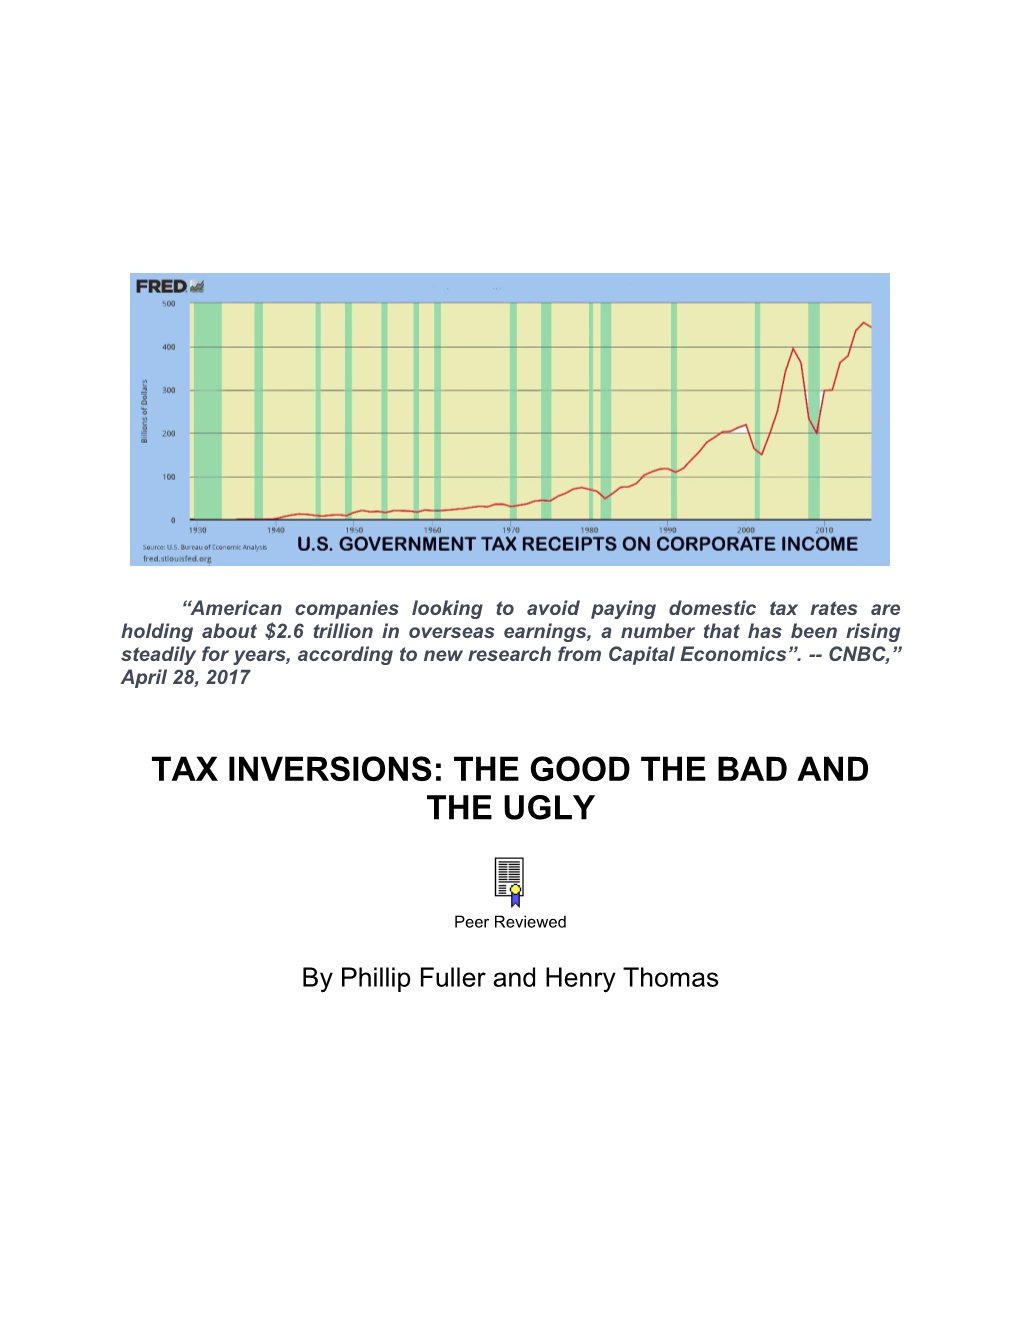 Tax Inversions: the Good the Bad and the Ugly